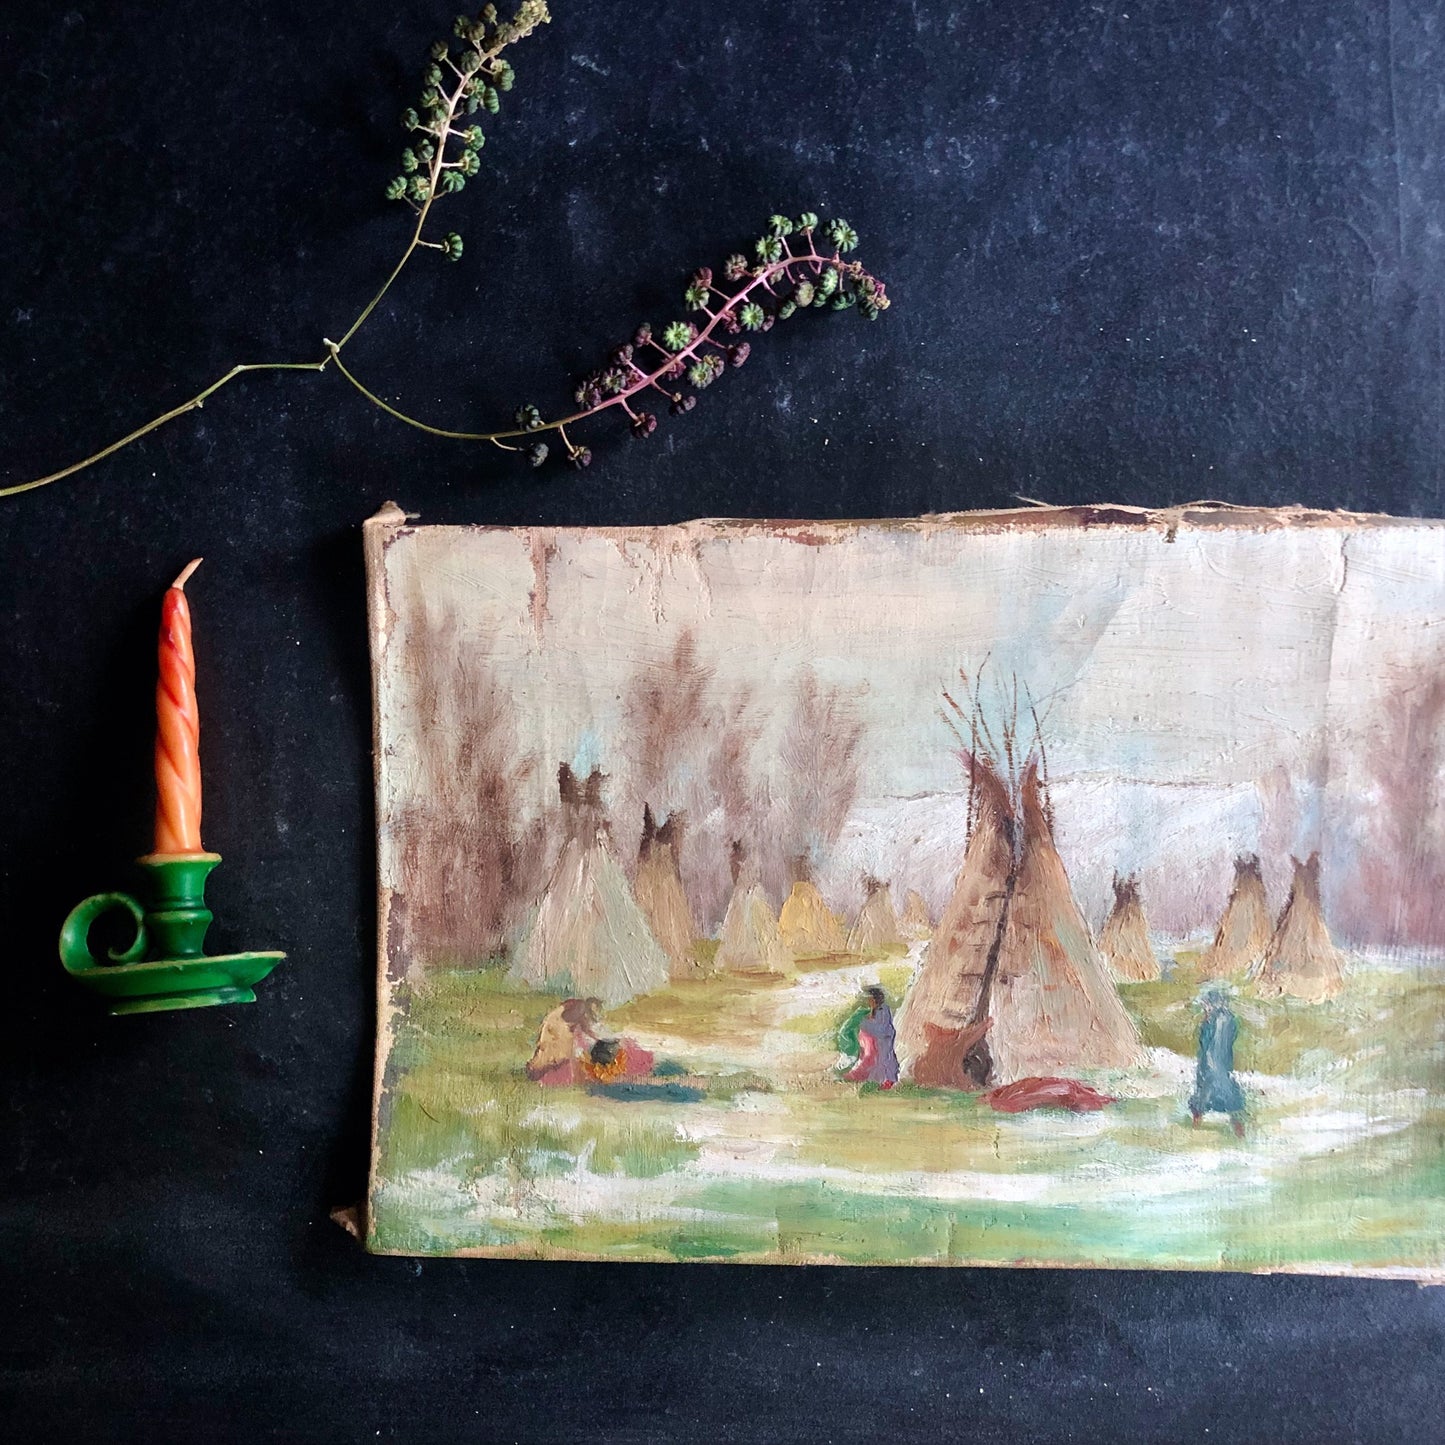 Vintage Native American Village Oil Painting on Canvas